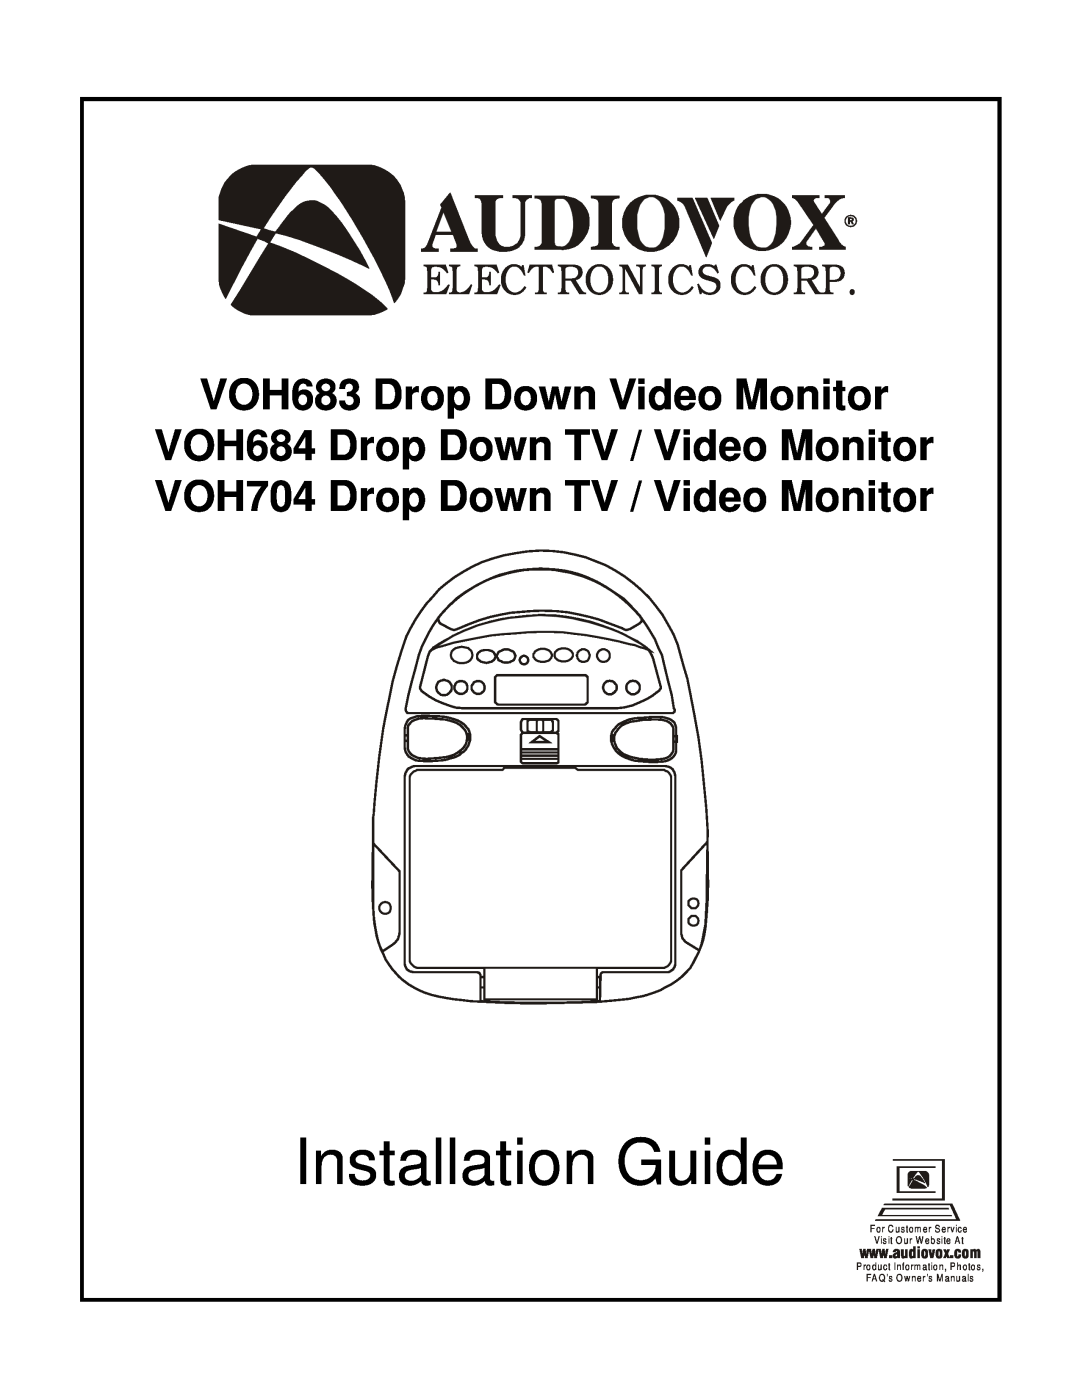 Audiovox VOH684, VOH704 owner manual Installation Guide, Electronics Corp, VOH683 Drop Down Video Monitor 